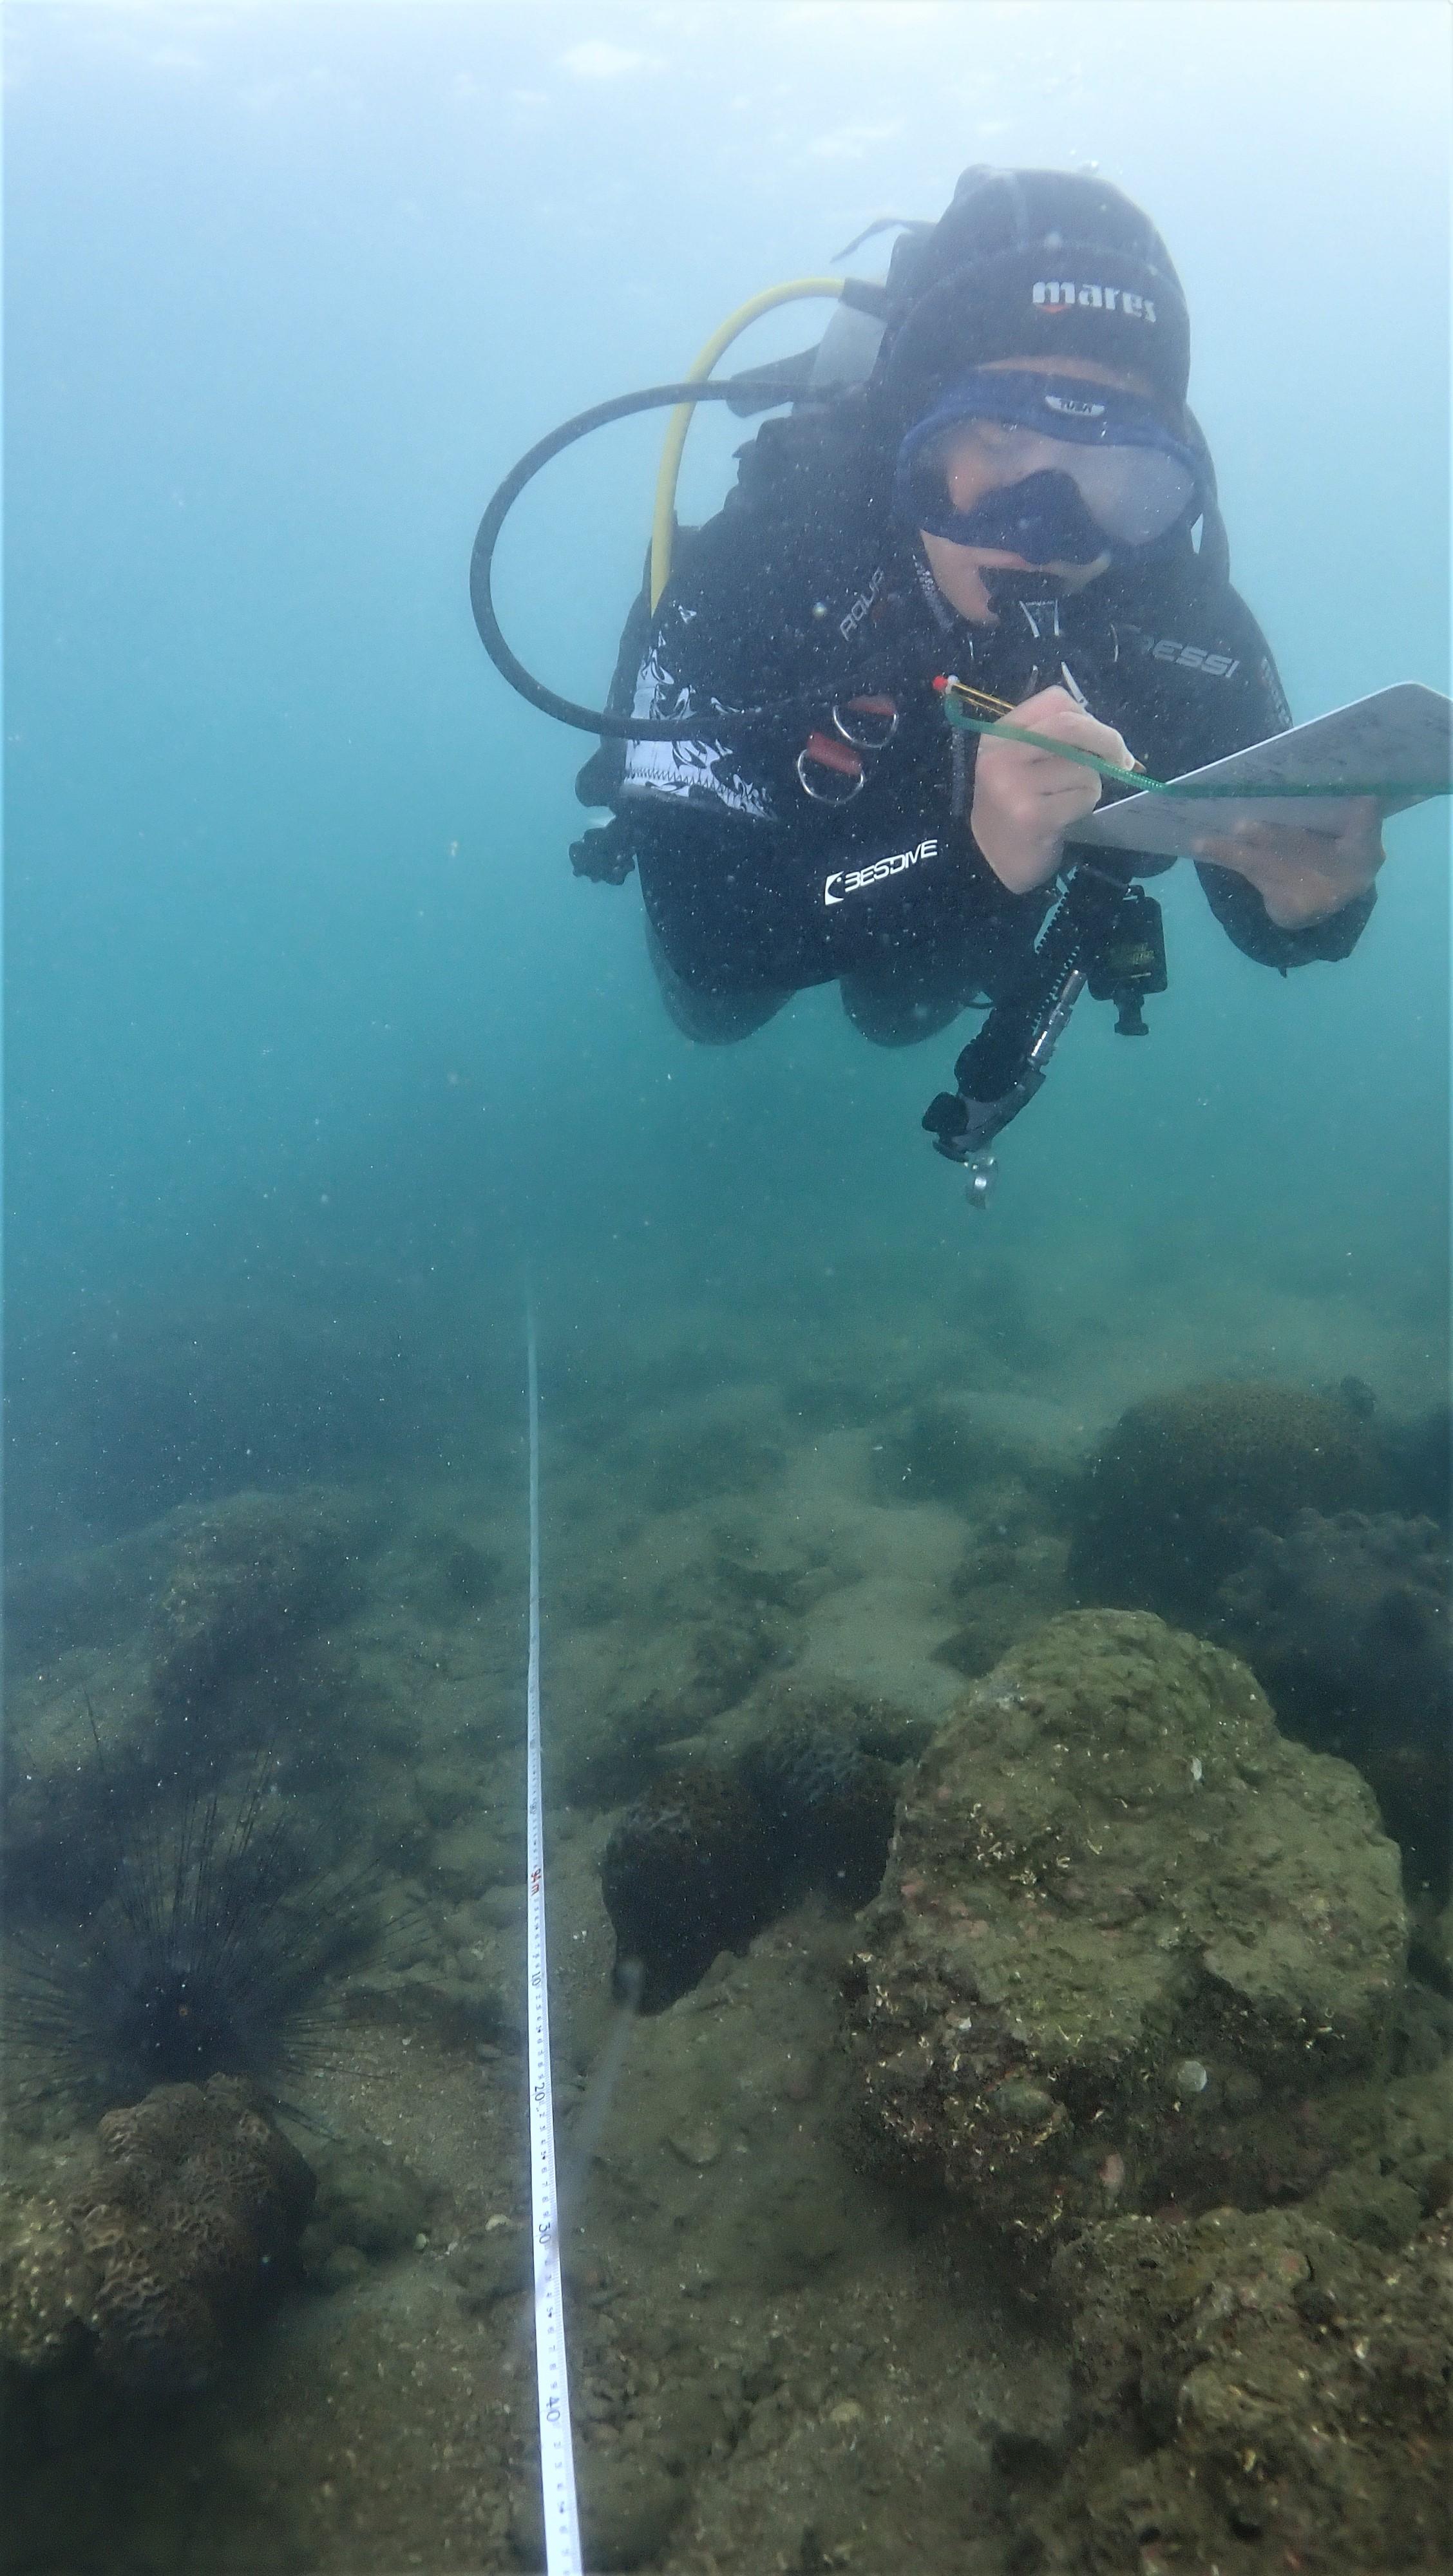 The Agriculture, Fisheries and Conservation Department announced today (December 3) that the results of the Hong Kong Reef Check this year showed that local corals are generally in a healthy condition and that the species diversity remains on the high side. Photo shows a Reef Check diver conducting a coral survey.